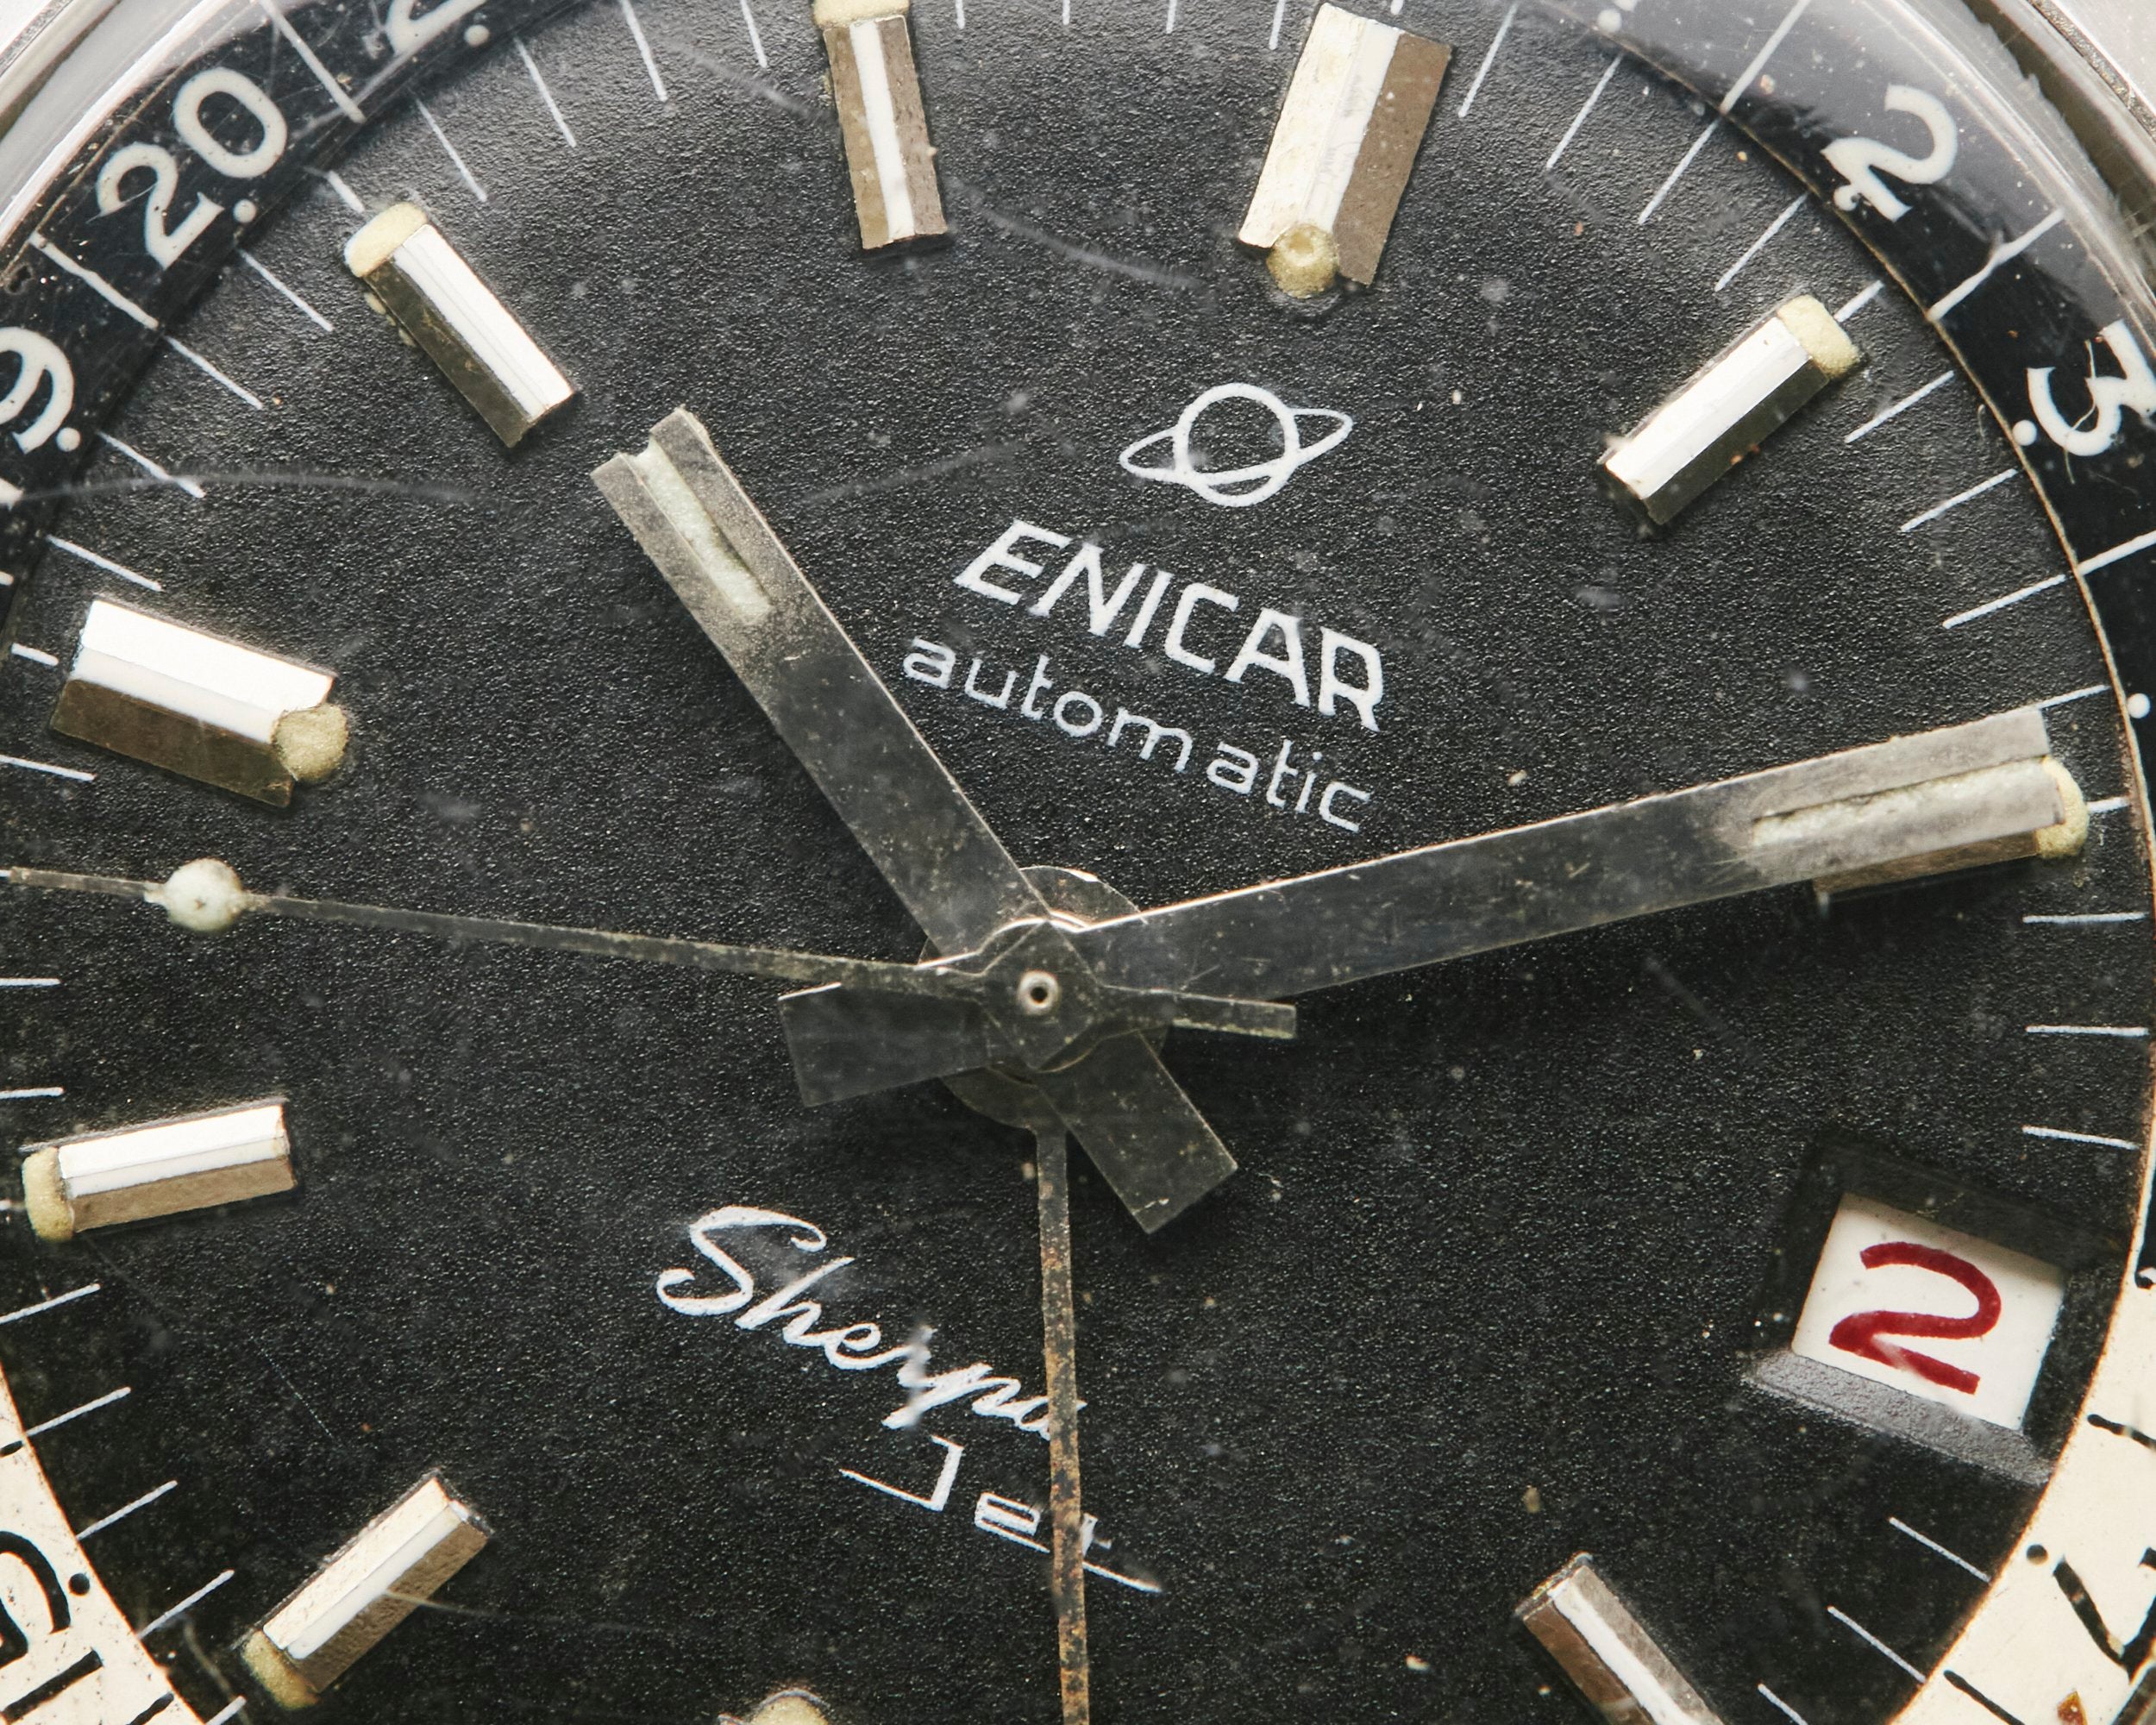 Enicar Sherpa Jet ref. 148-35-02 (Box & Papers)